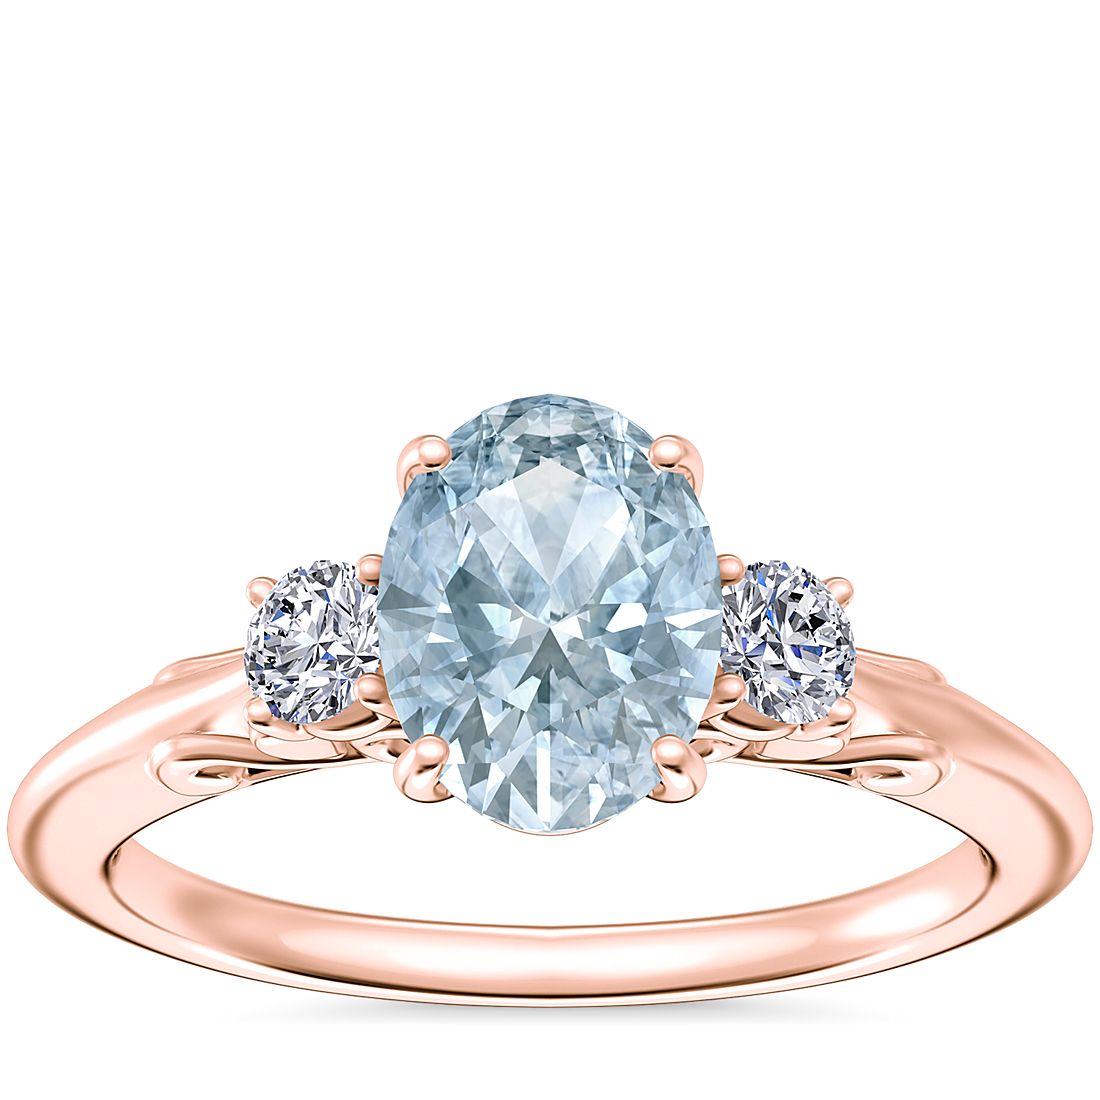 Vintage Three Stone Engagement Ring with Oval Aquamarine in 14k Rose Gold (8x6mm)